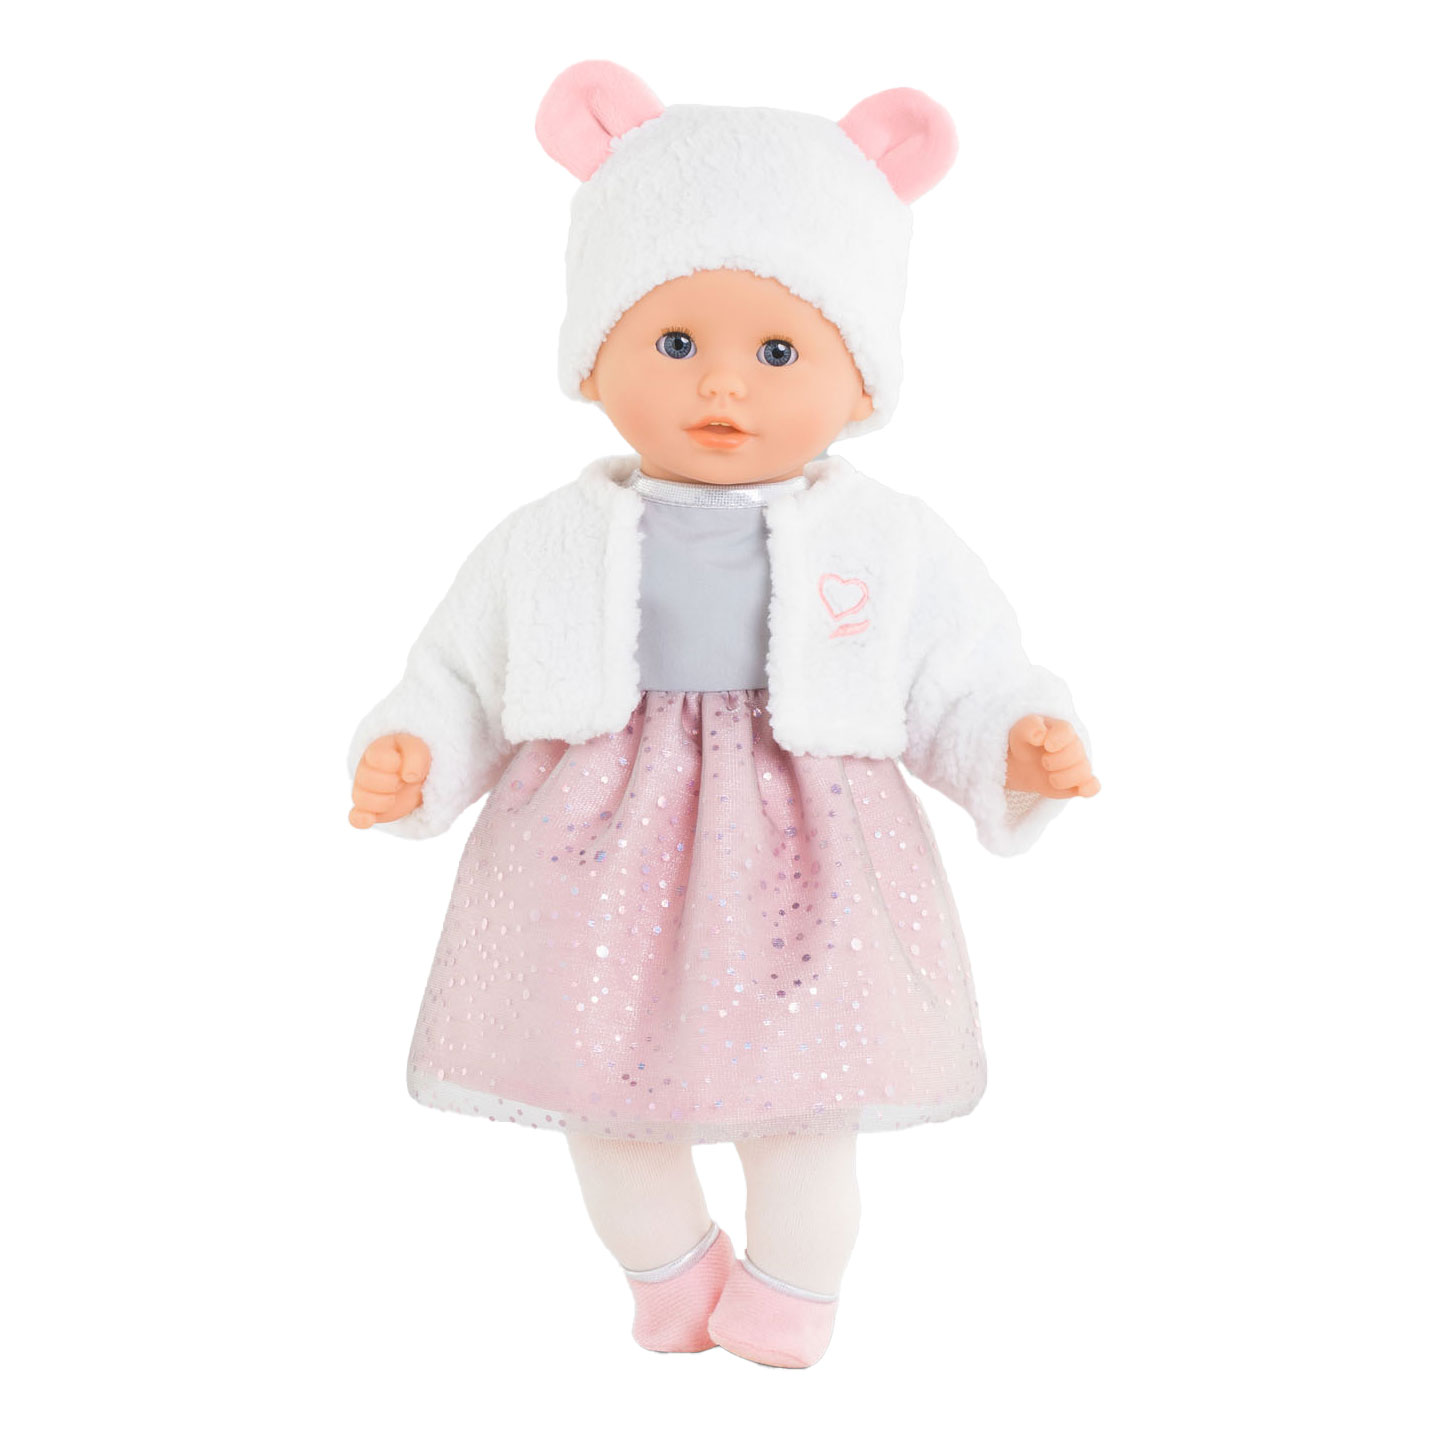 Corolle Mon Premier Poupon Sweet Heart Toffee Pink Toy Baby Doll